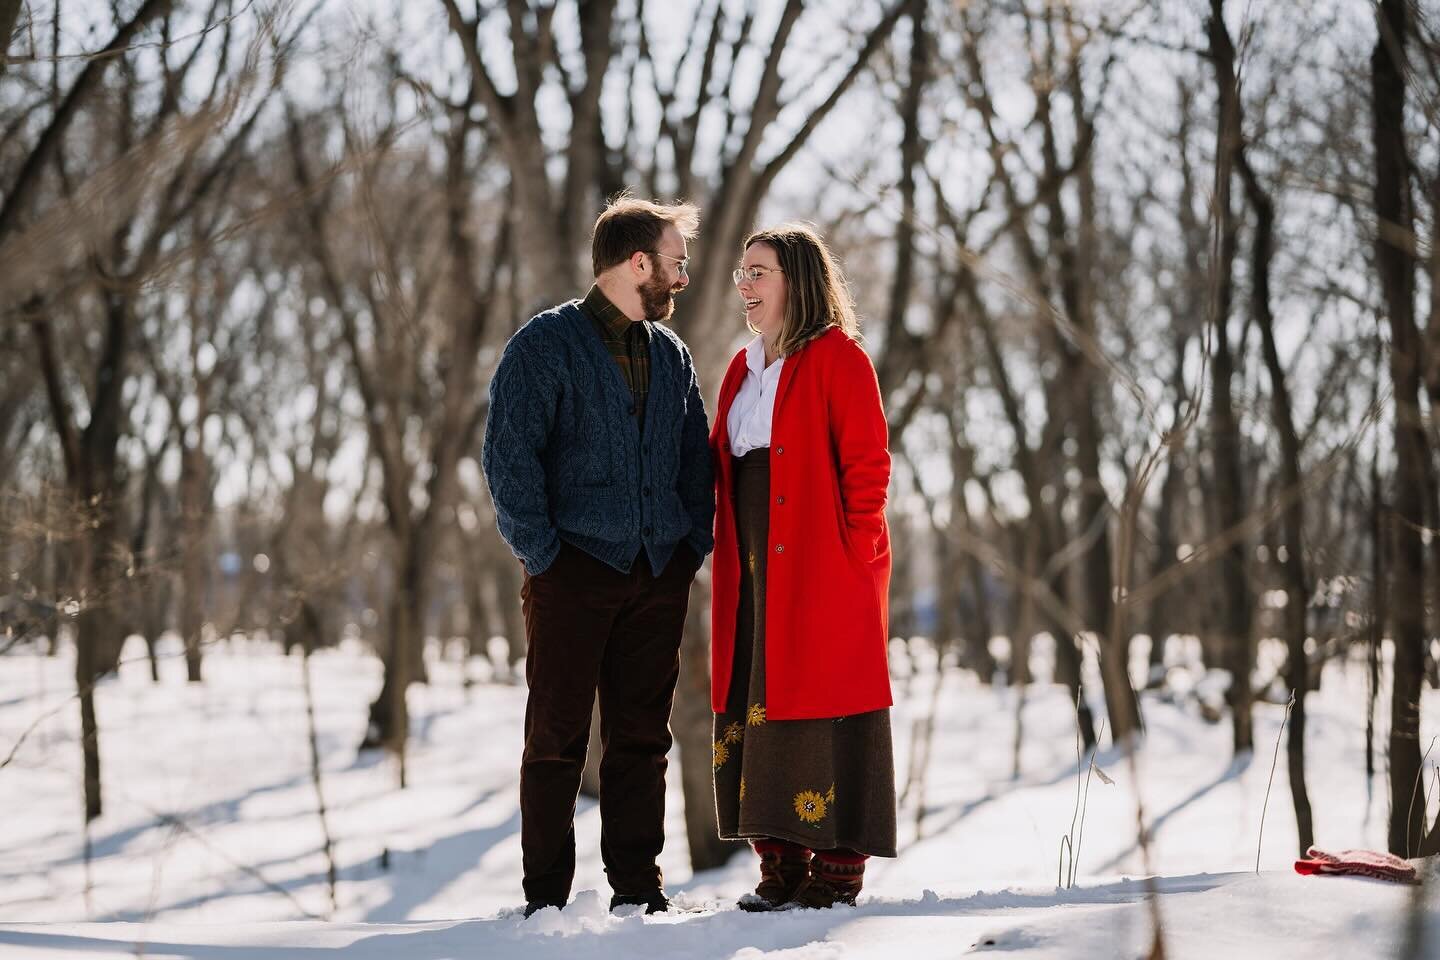 Happy Wedding Day, Meredith and Cameron!
🩵
We&rsquo;re rolling right into the 2024 season, and celebrating these two with a winter wonderland camp wedding! Meredith &amp; Cam attended a camp wedding that they loved, and these outdoor enthusiasts kne